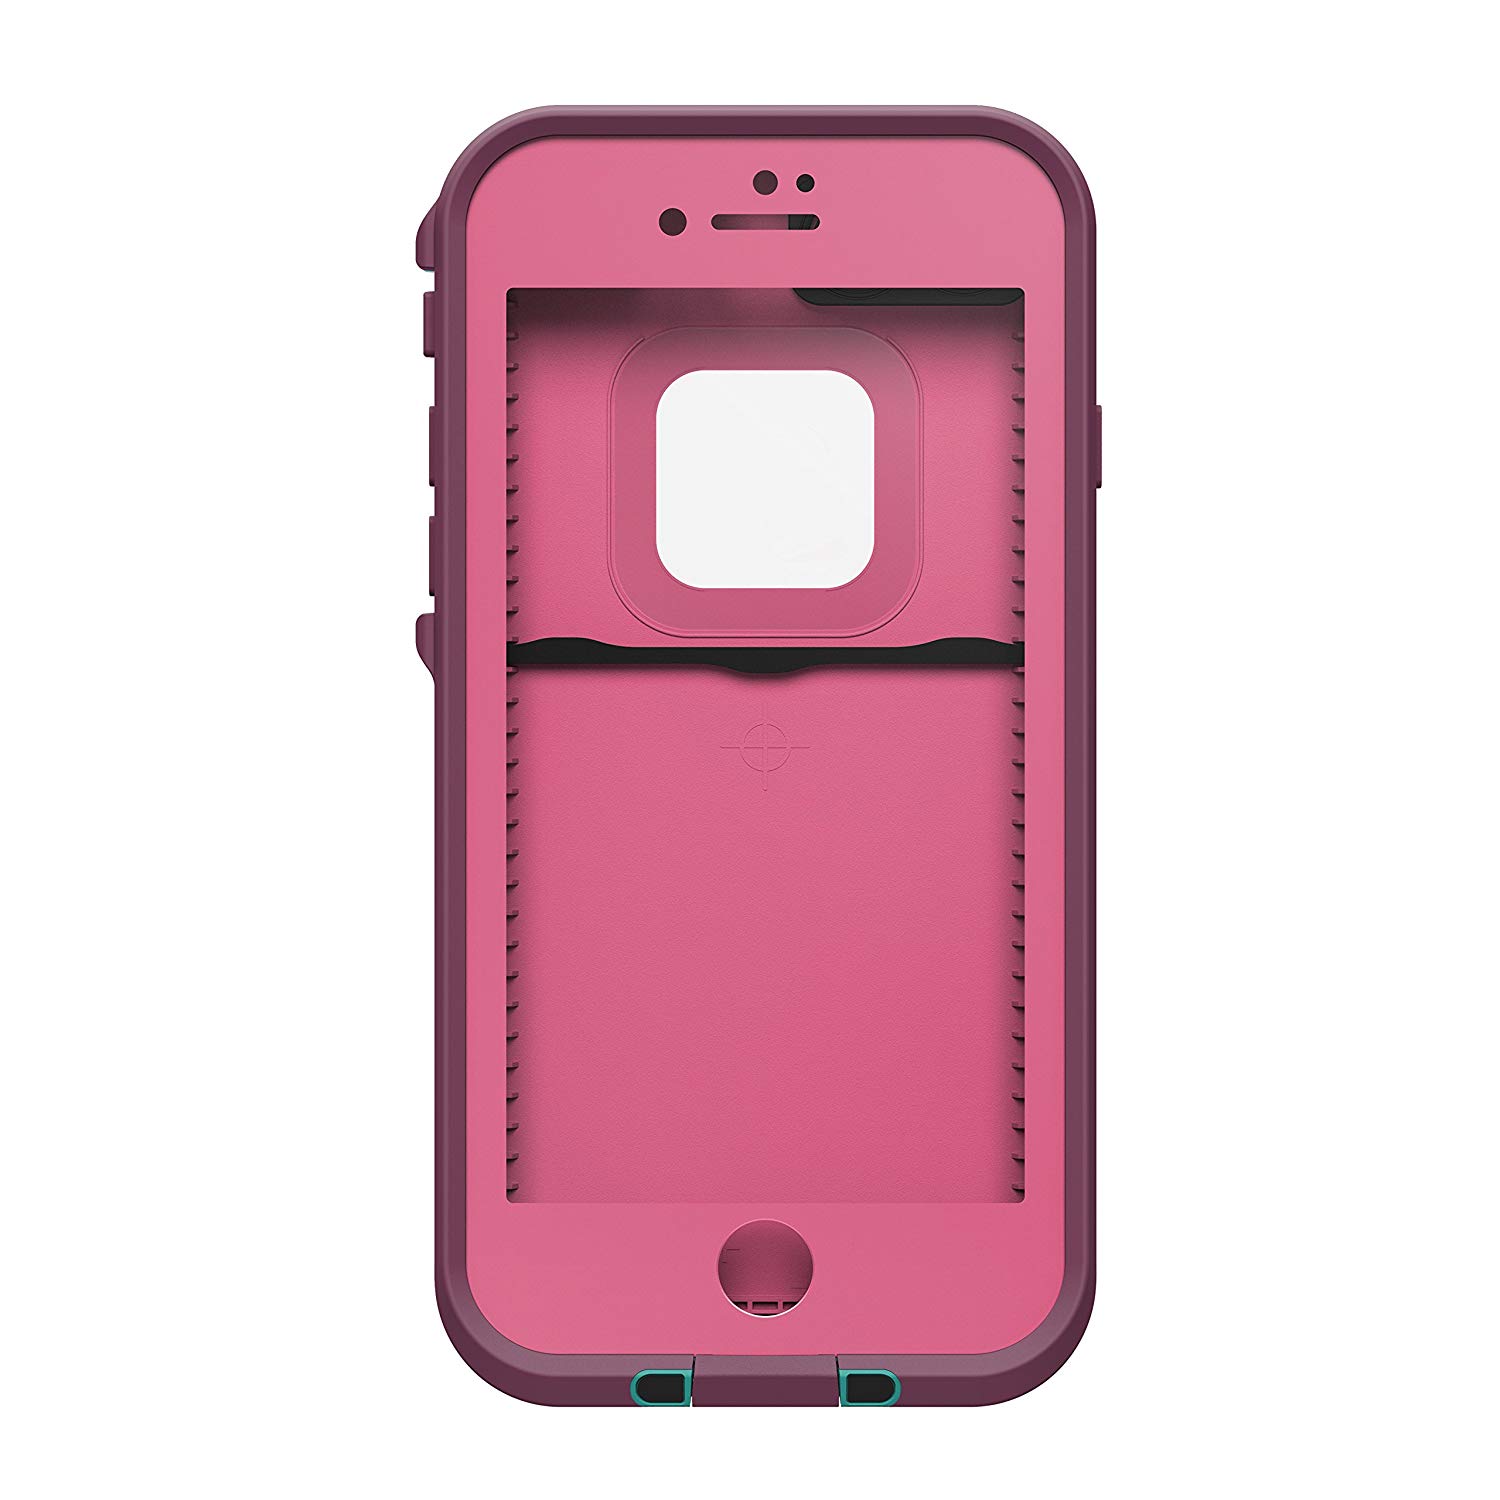 Lifeproof Fre for iPhone 7 Twighlights Edge Pink - "Limited Edition"